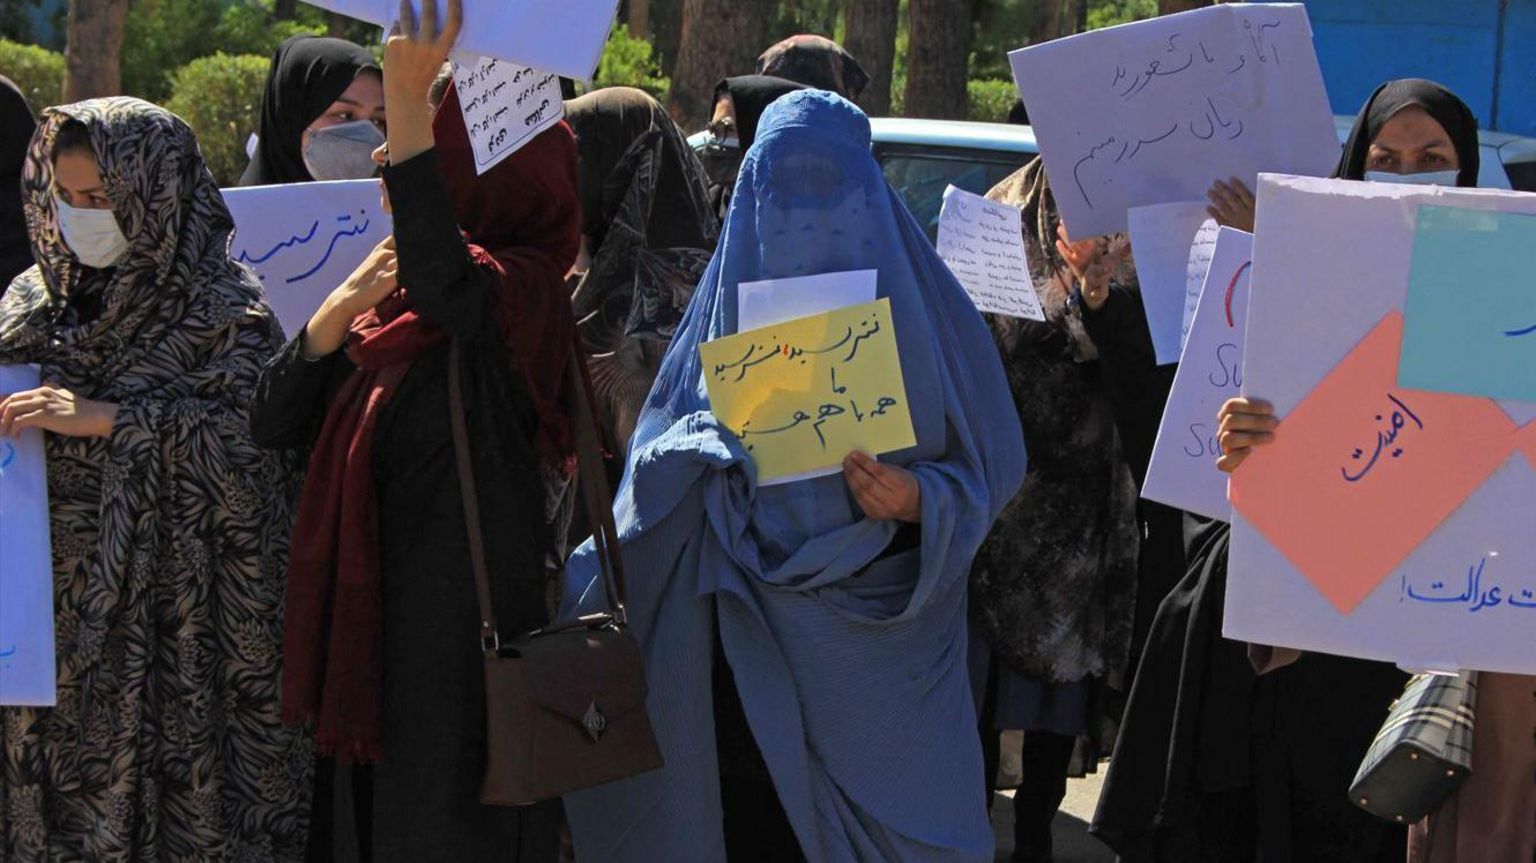 Afghan women hold placards as they take part in a protest in Herat on September 2, 2021